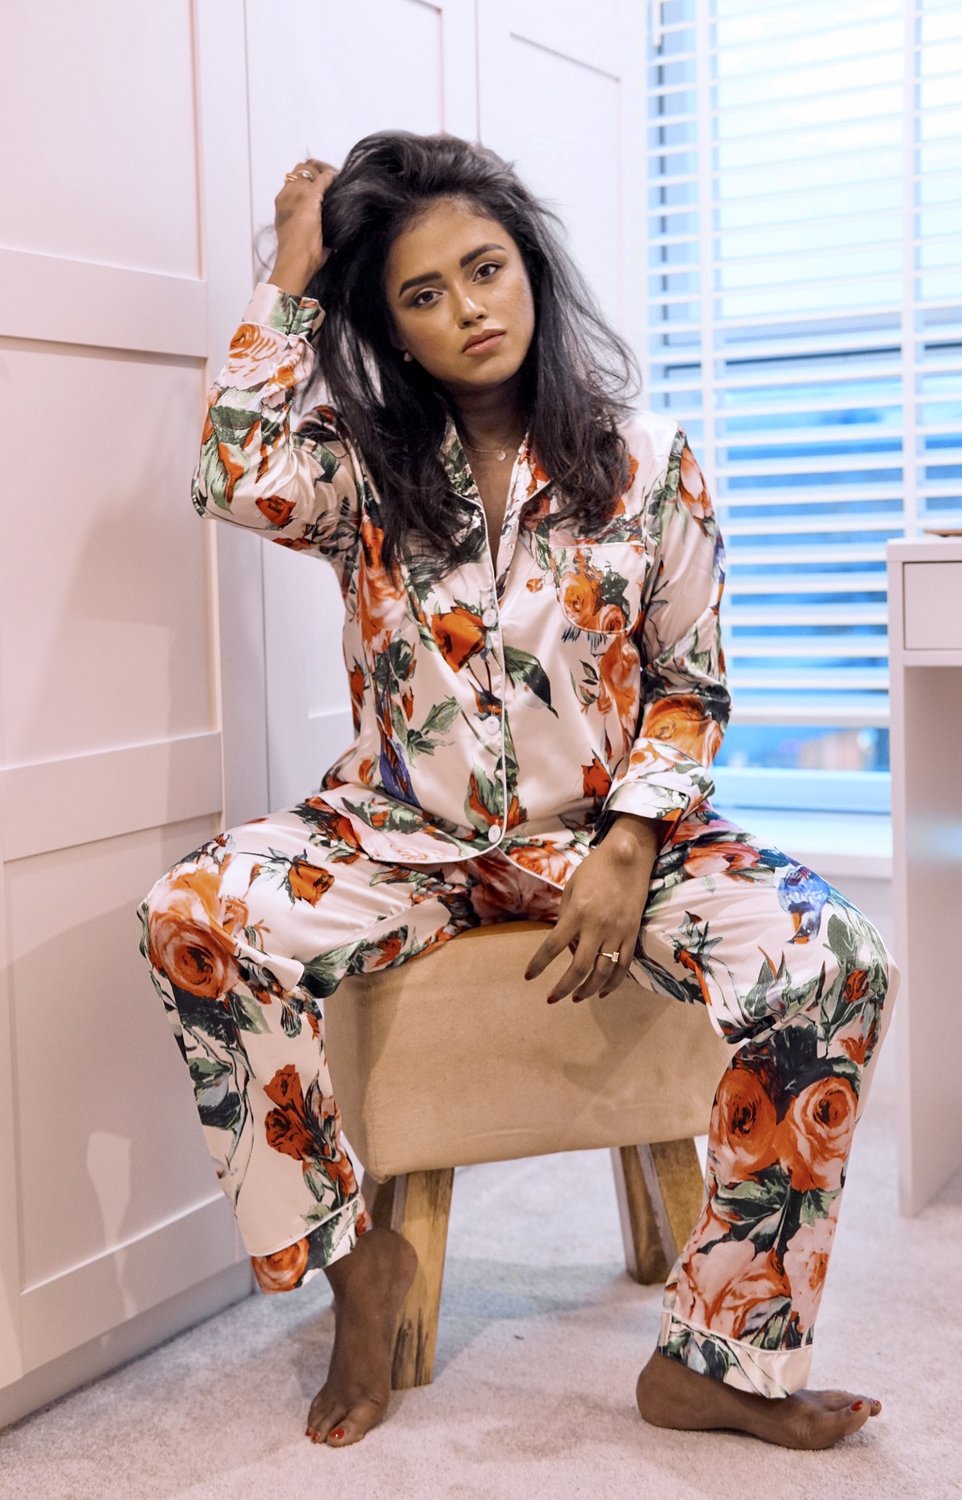 Sachini sitting in front of a wardrobe wearing a white Chi Chi Clothing pyjama set with flowers